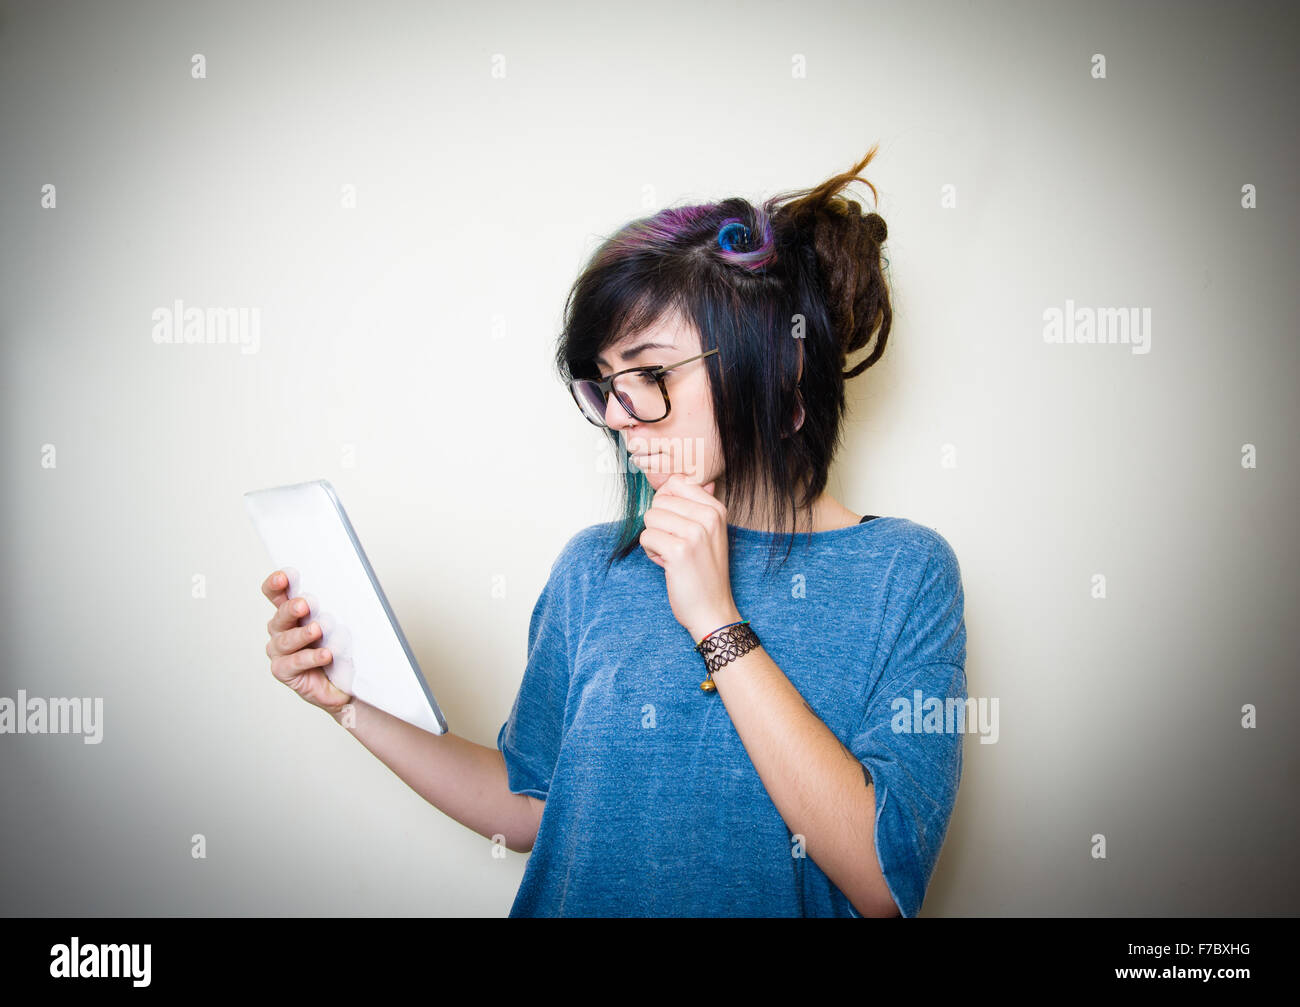 Pretty young teen woman using white tablet on white background Stock Photo